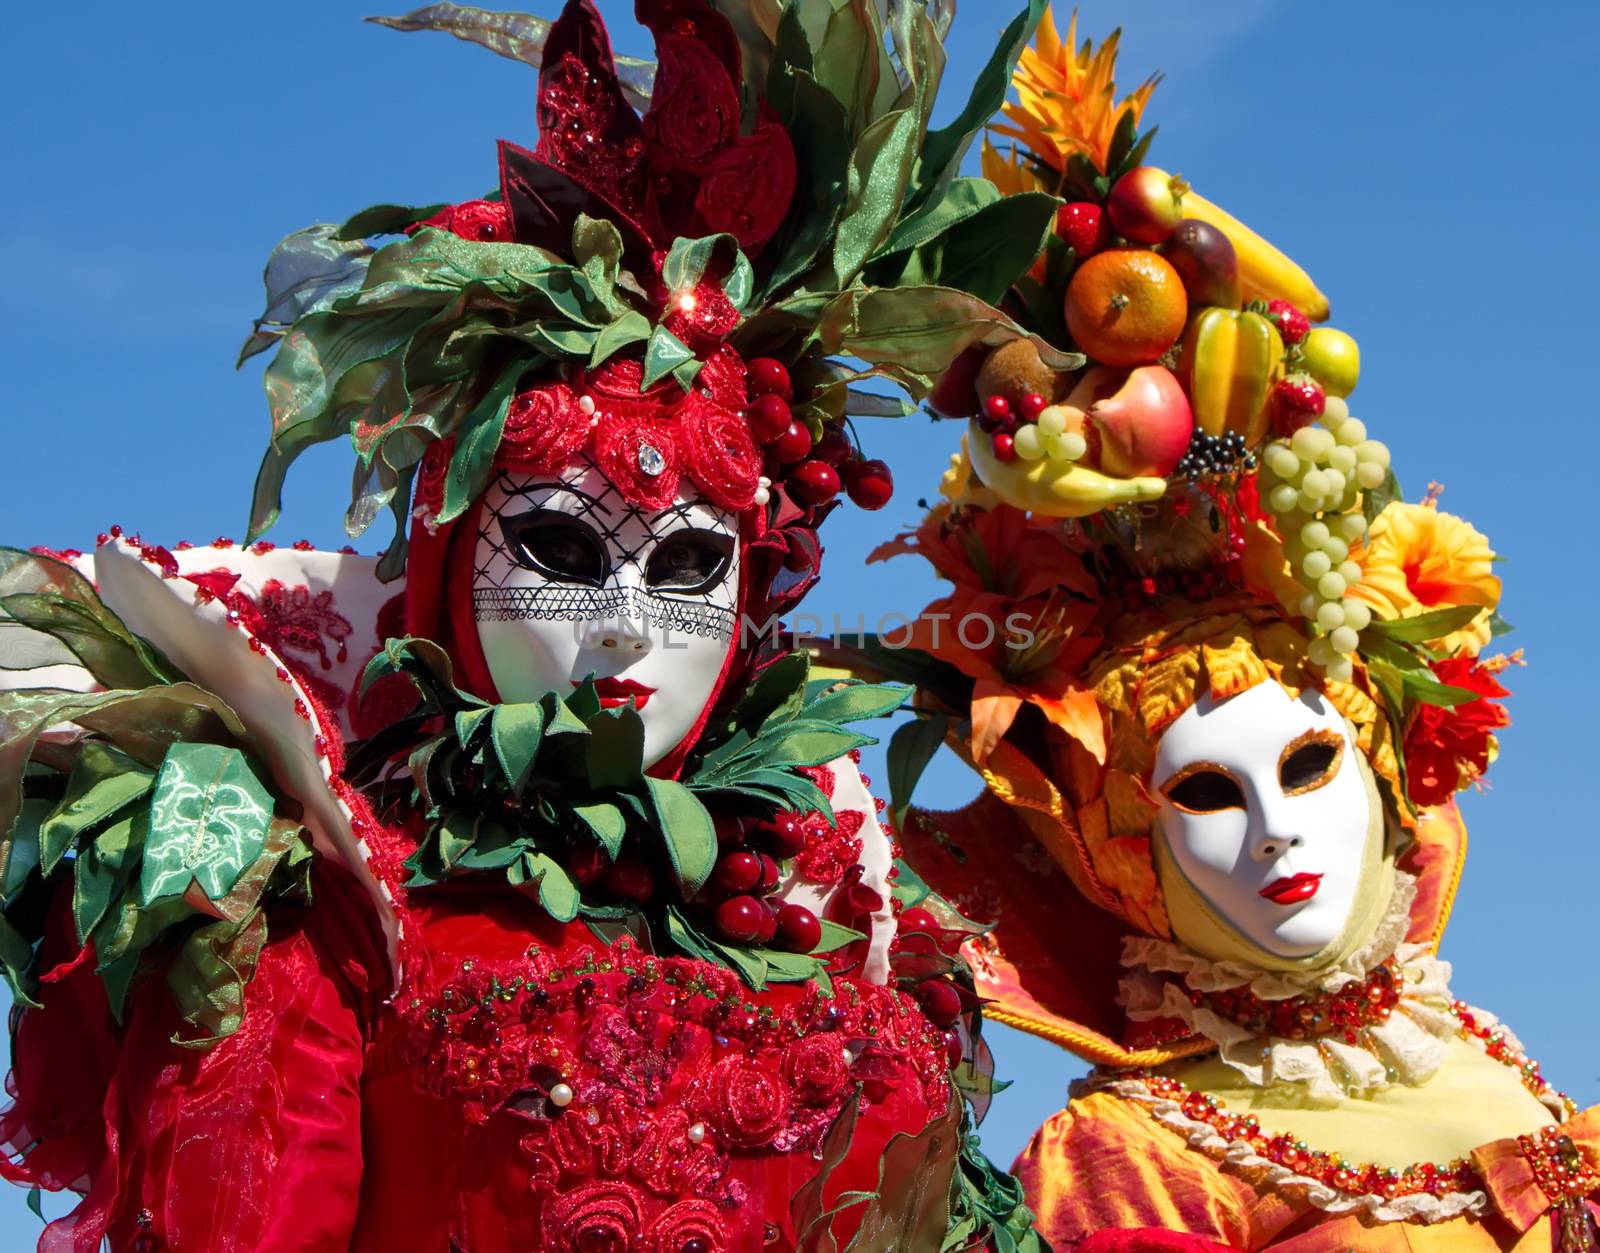 Beautiful colorful persons with lots of fruits at the 2014 Annecy venetian carnival, France